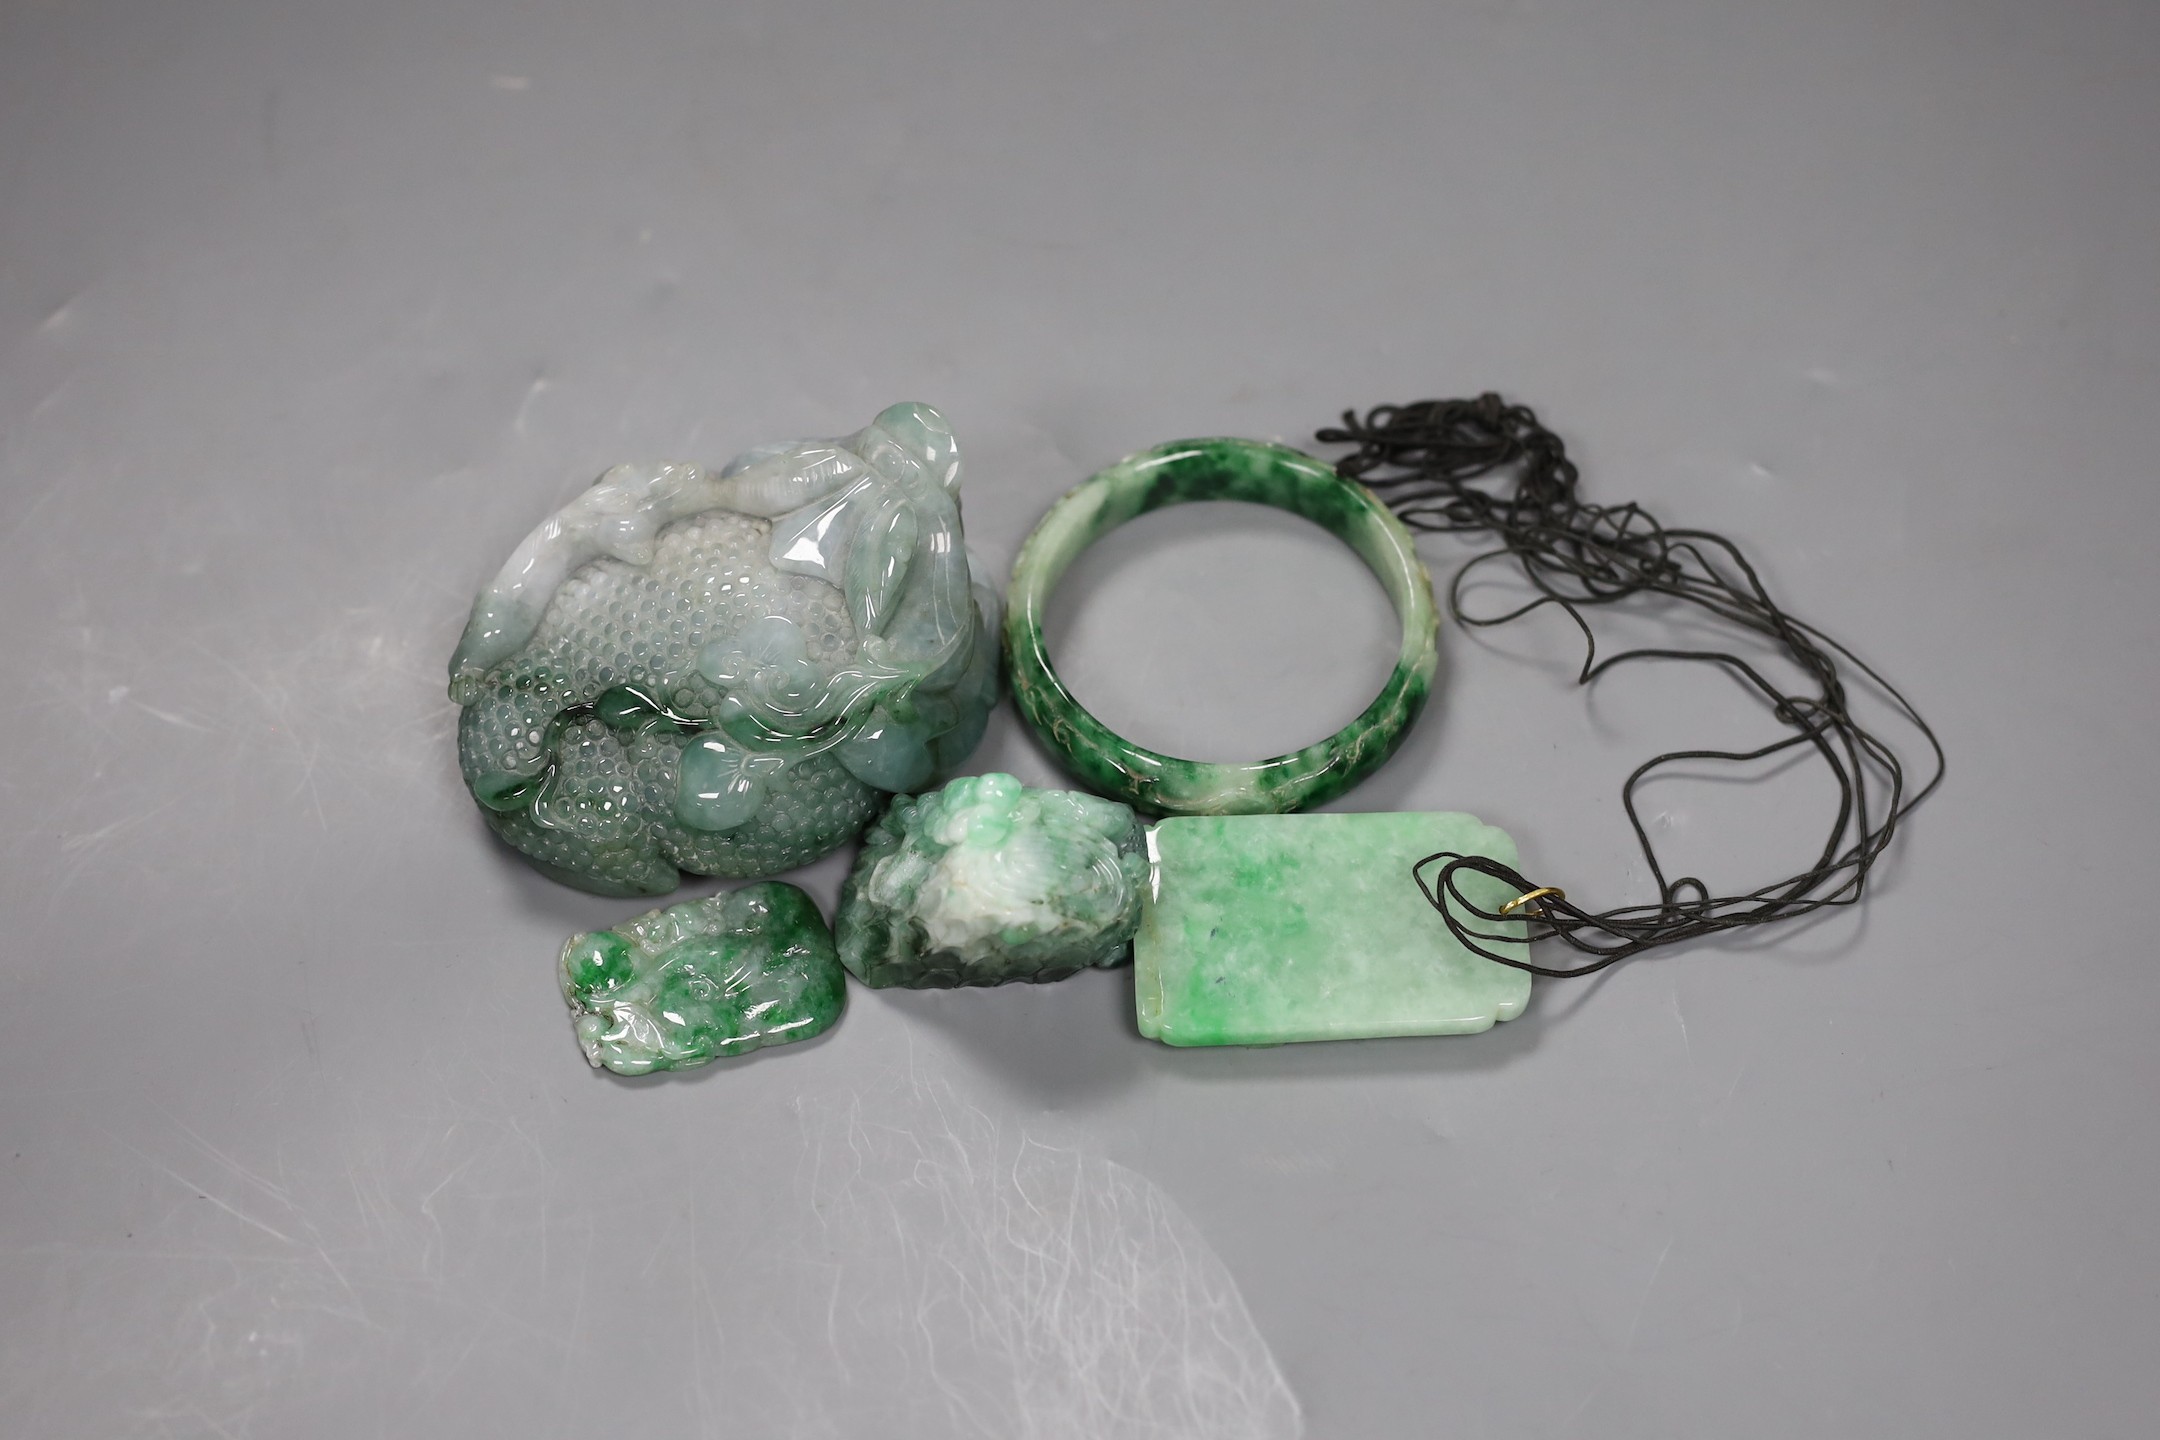 A group of five Chinese jadeite carvings, including two pendants and a bangle, largest 11cms long